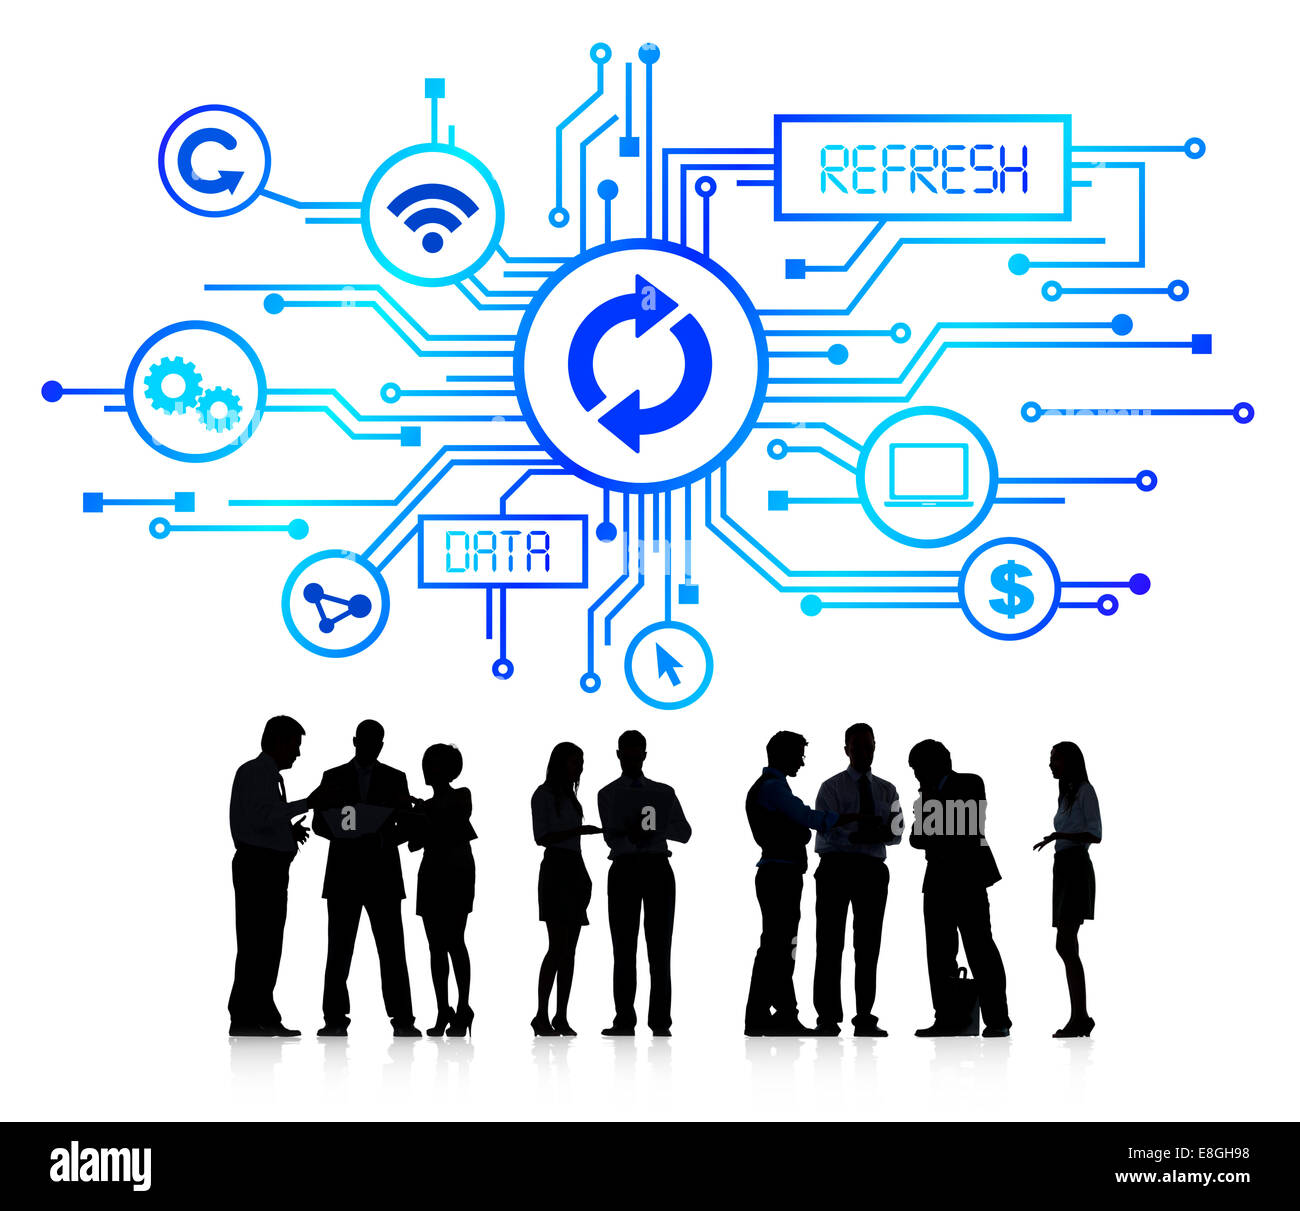 Silhouettes of Business People Working with Computer Concept Symbols Above Stock Photo